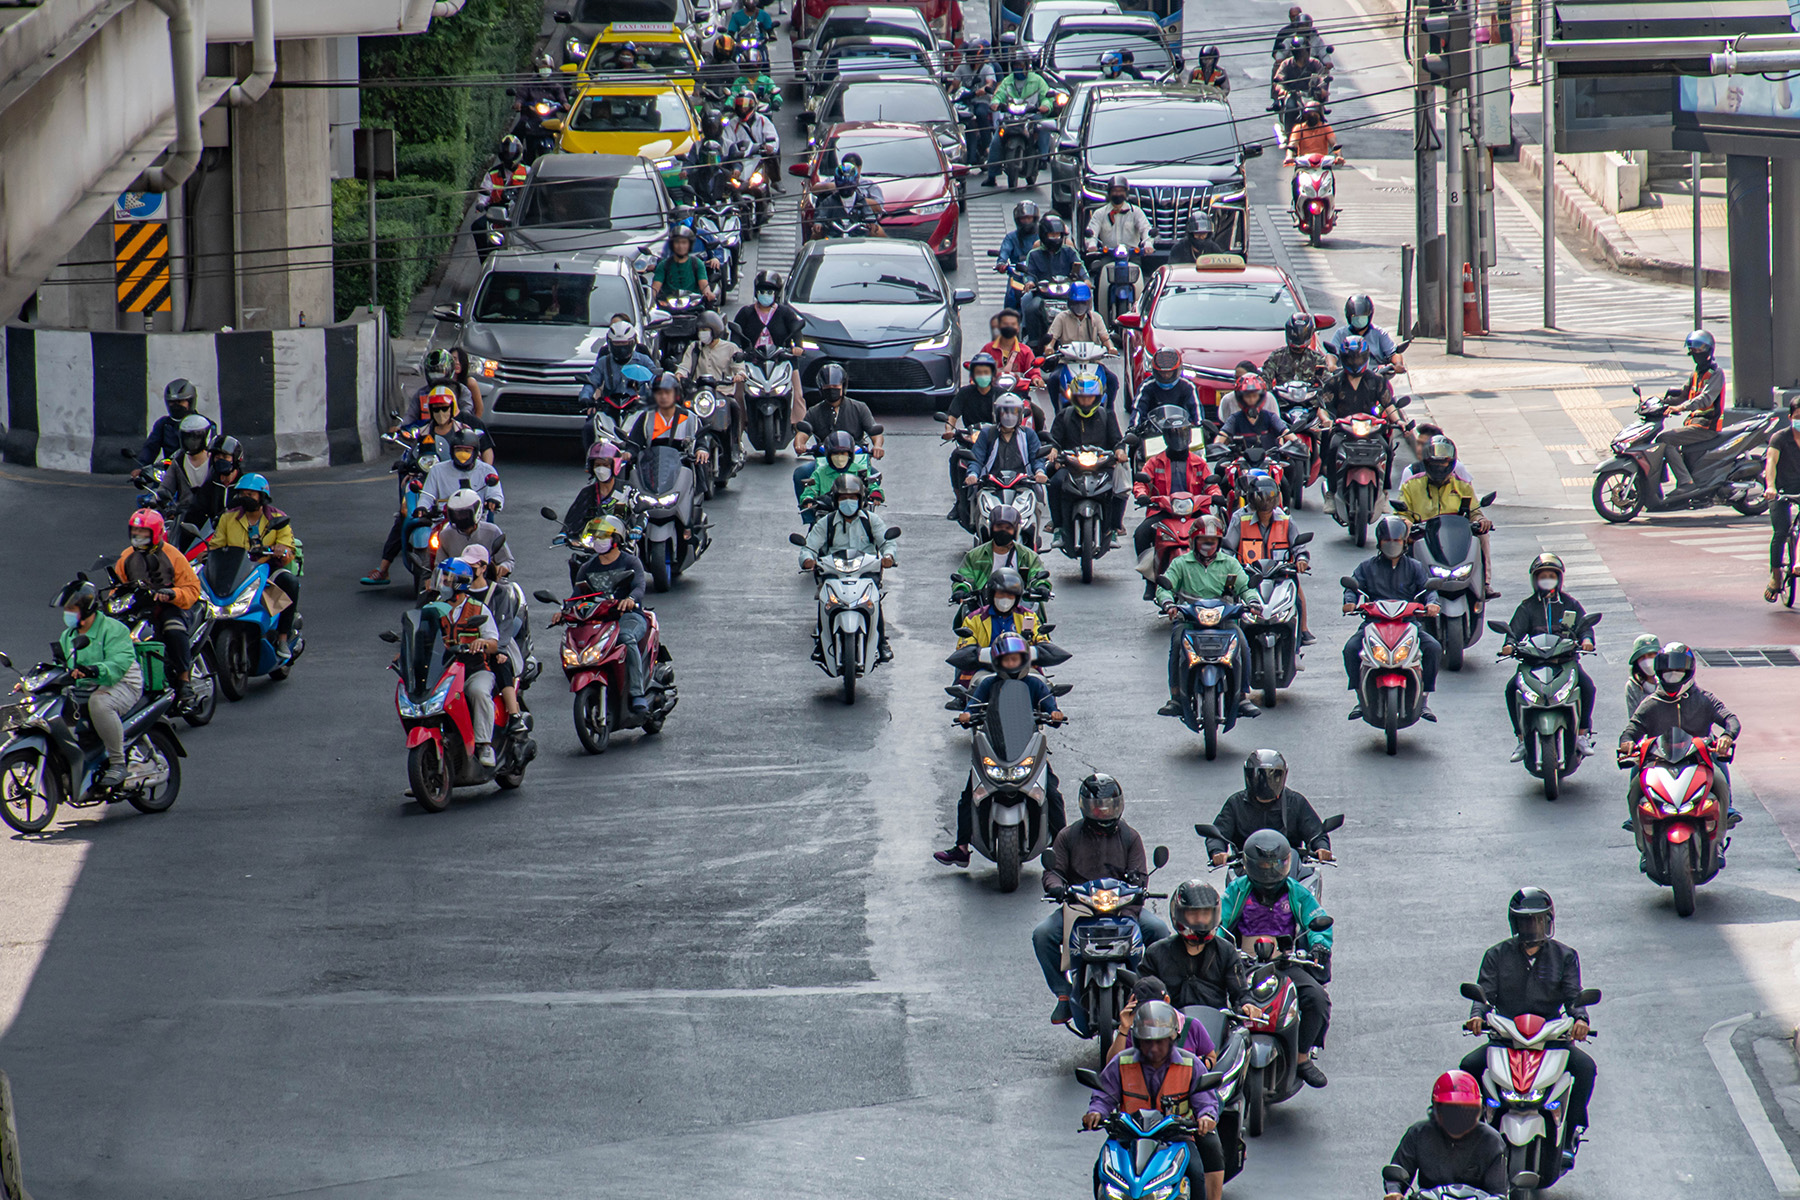 Busy road with loads of moped drivers and cars in Bangkok.